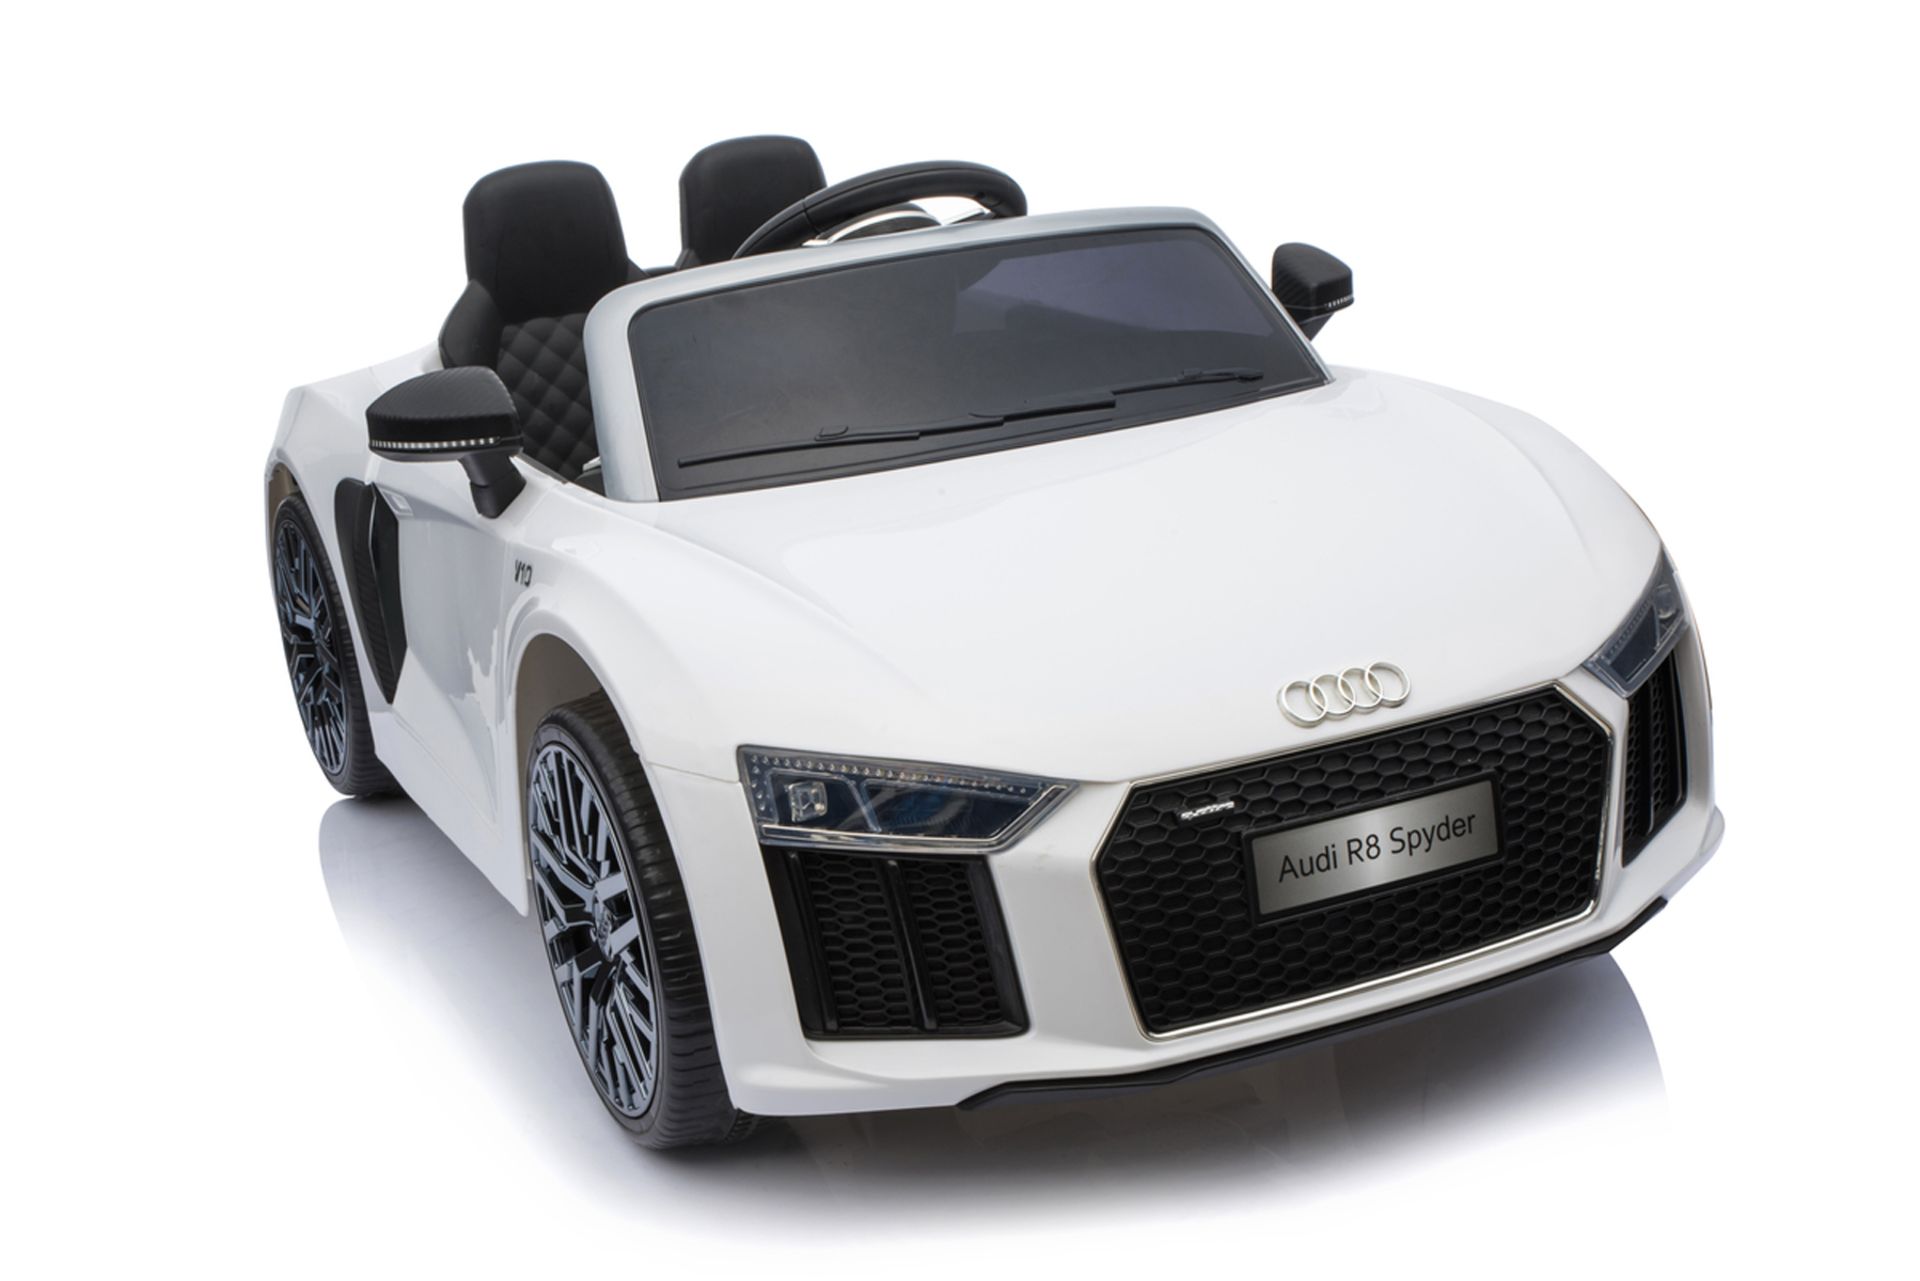 RIDE ON FULLY LICENSED AUDI R8 SPYDER 6V WITH PARENTAL REMOTE CONTROL - WHITE - Image 3 of 8